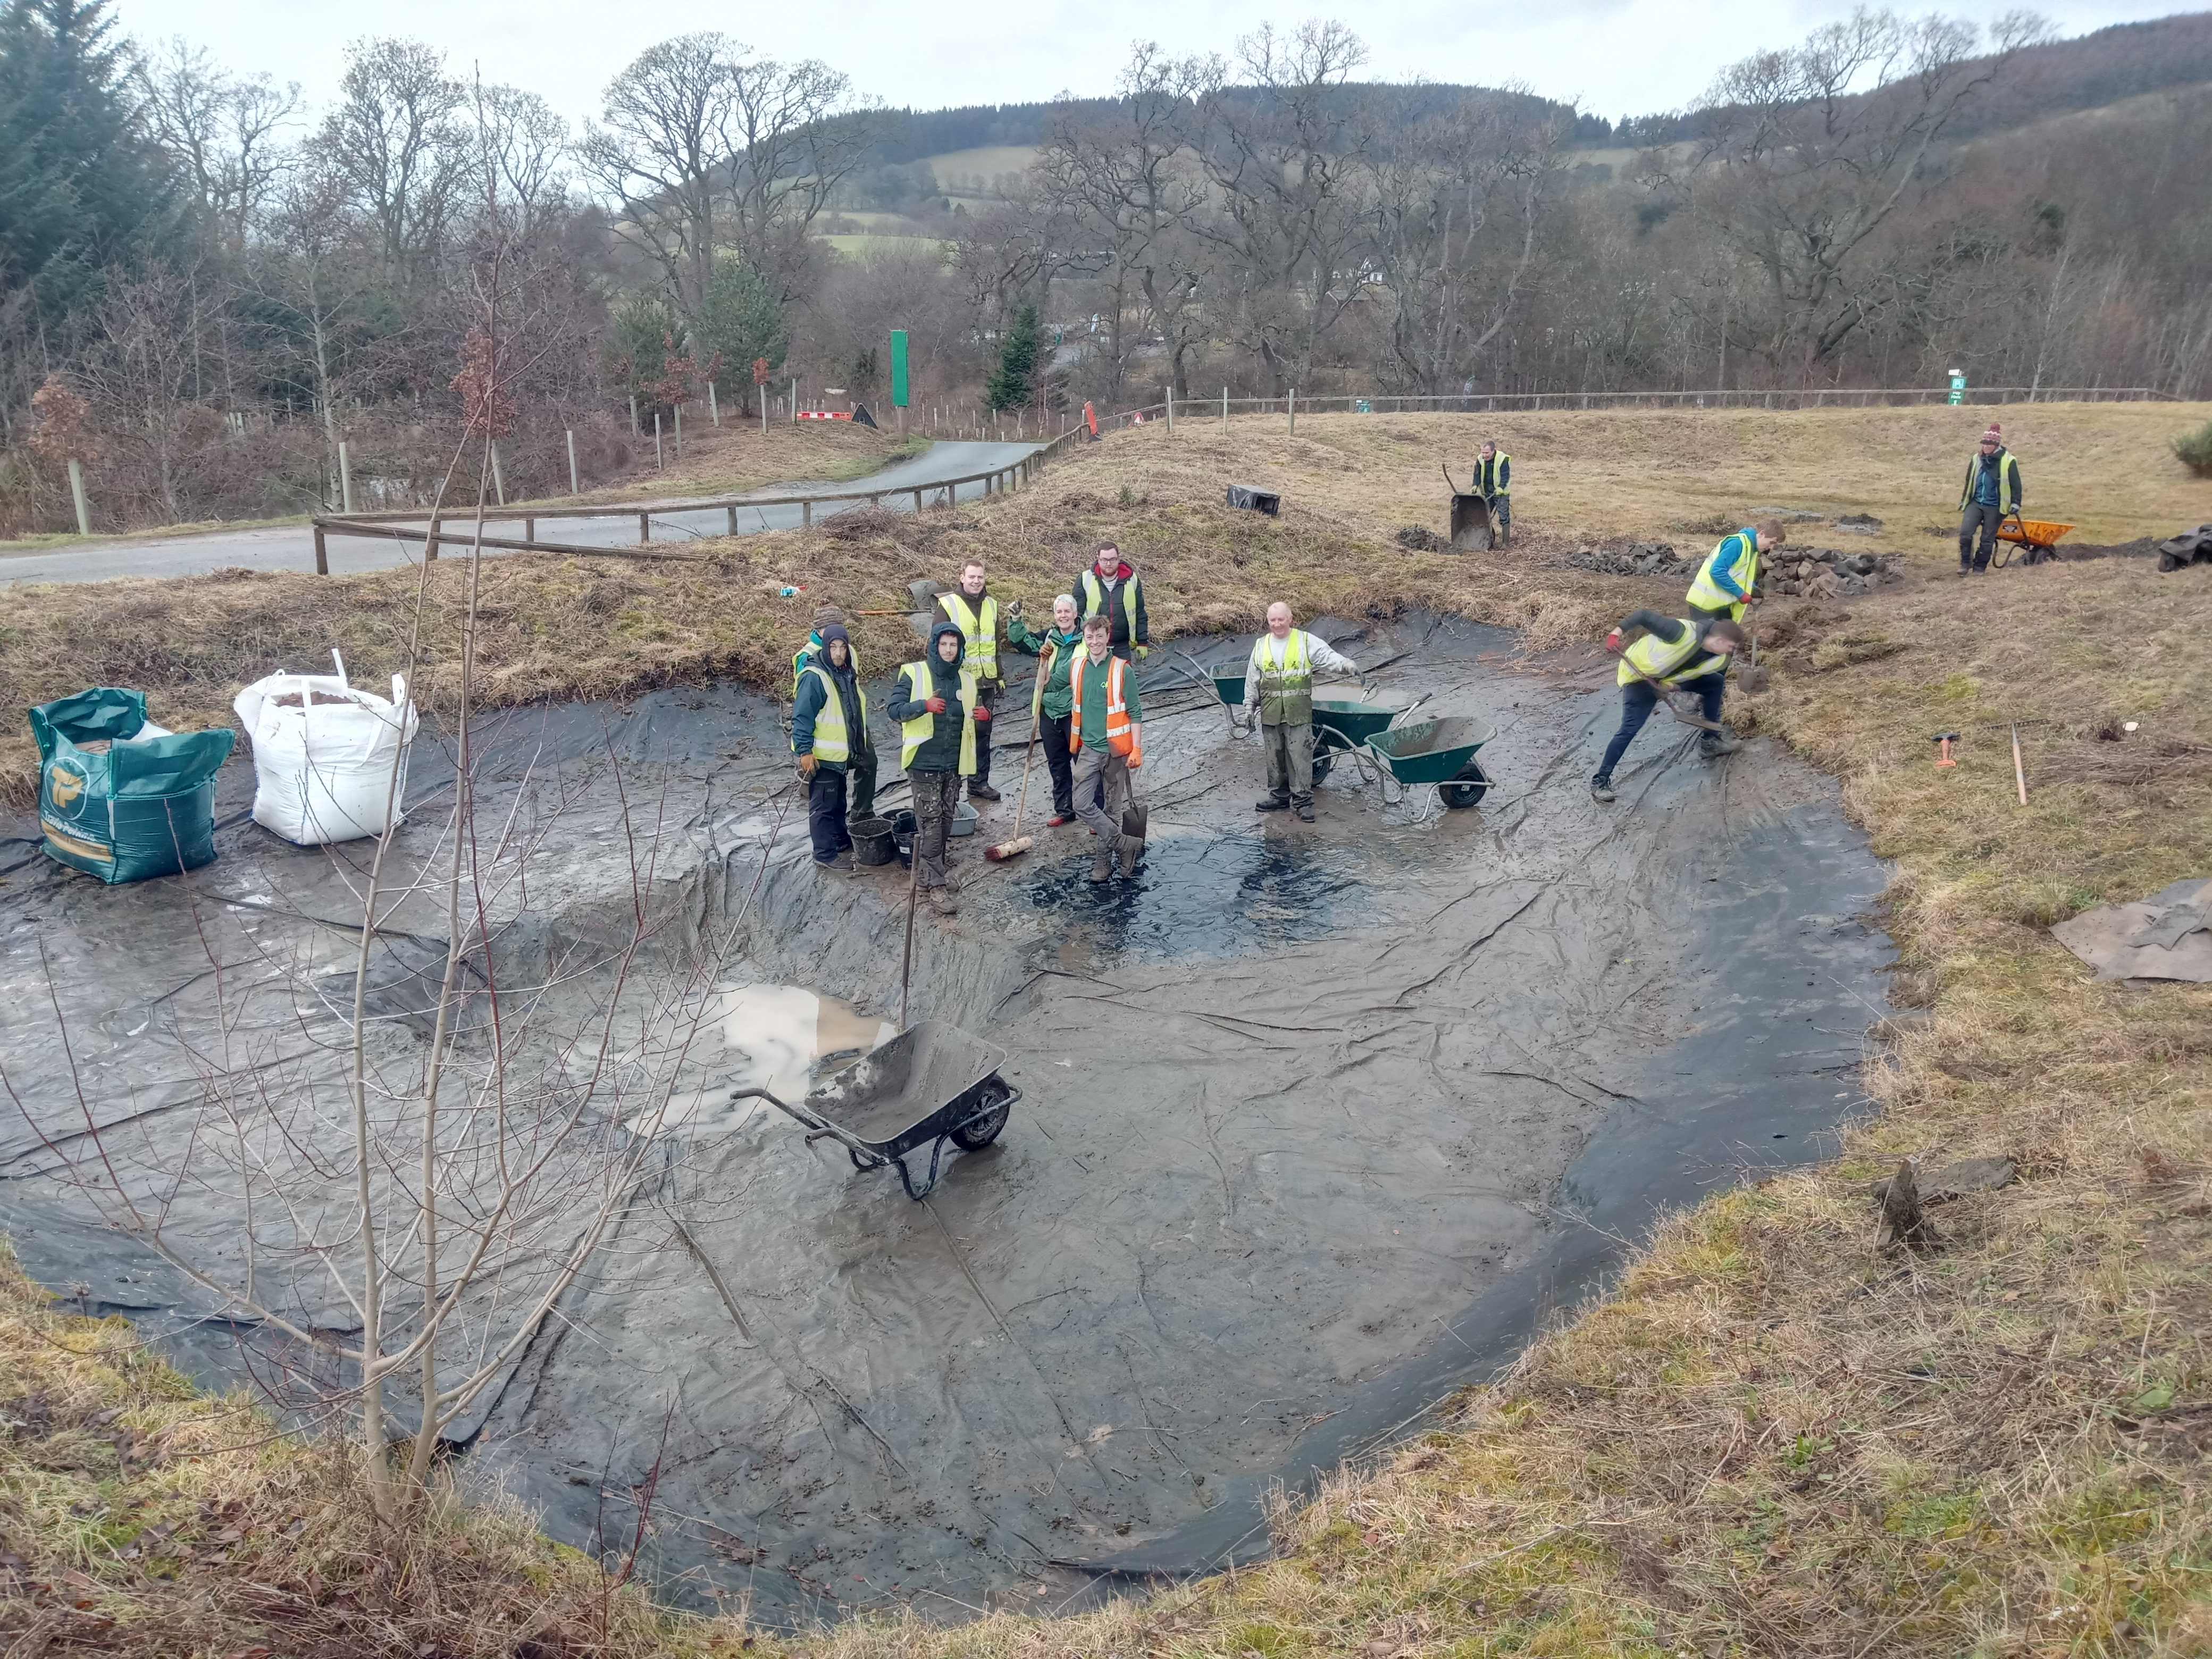 Volunteers assemble in the pond, ready for some hard graft